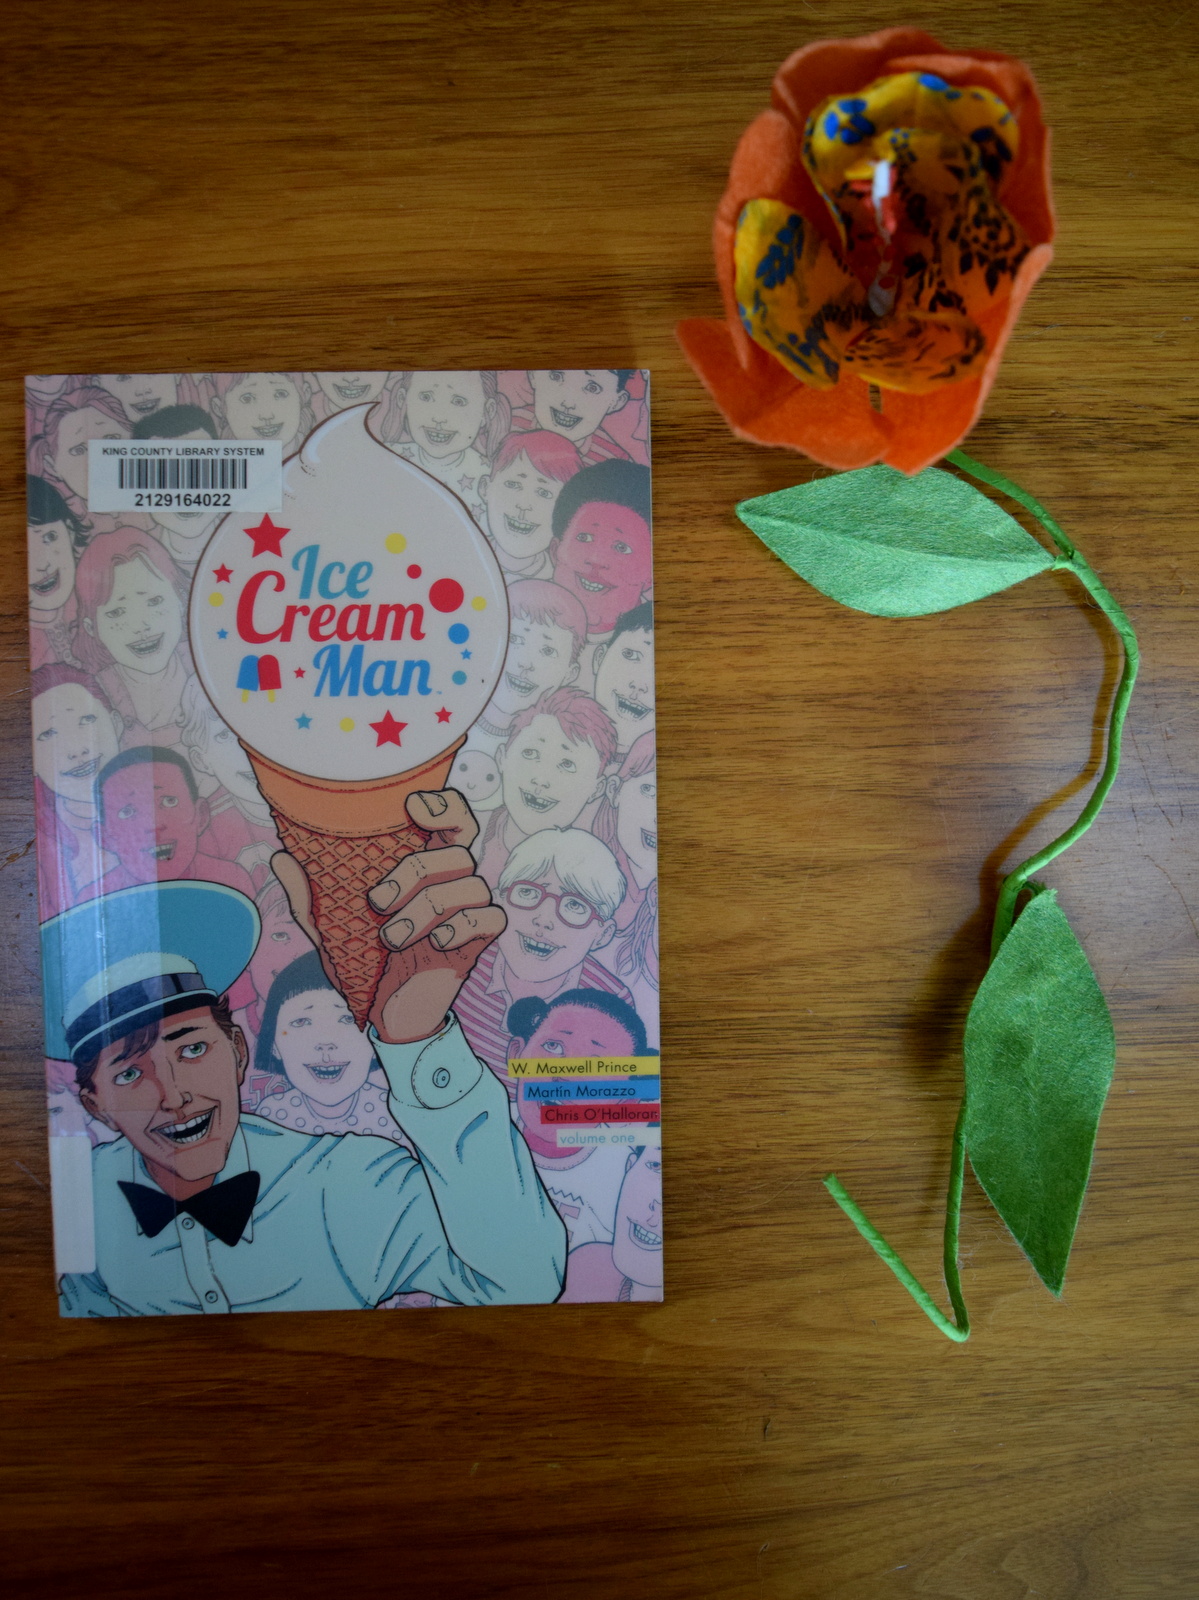 Fauna Finds Flora Book Review Ice Cream Man By W Maxwell Prince Martin Marazzo And Chirs O Halloran